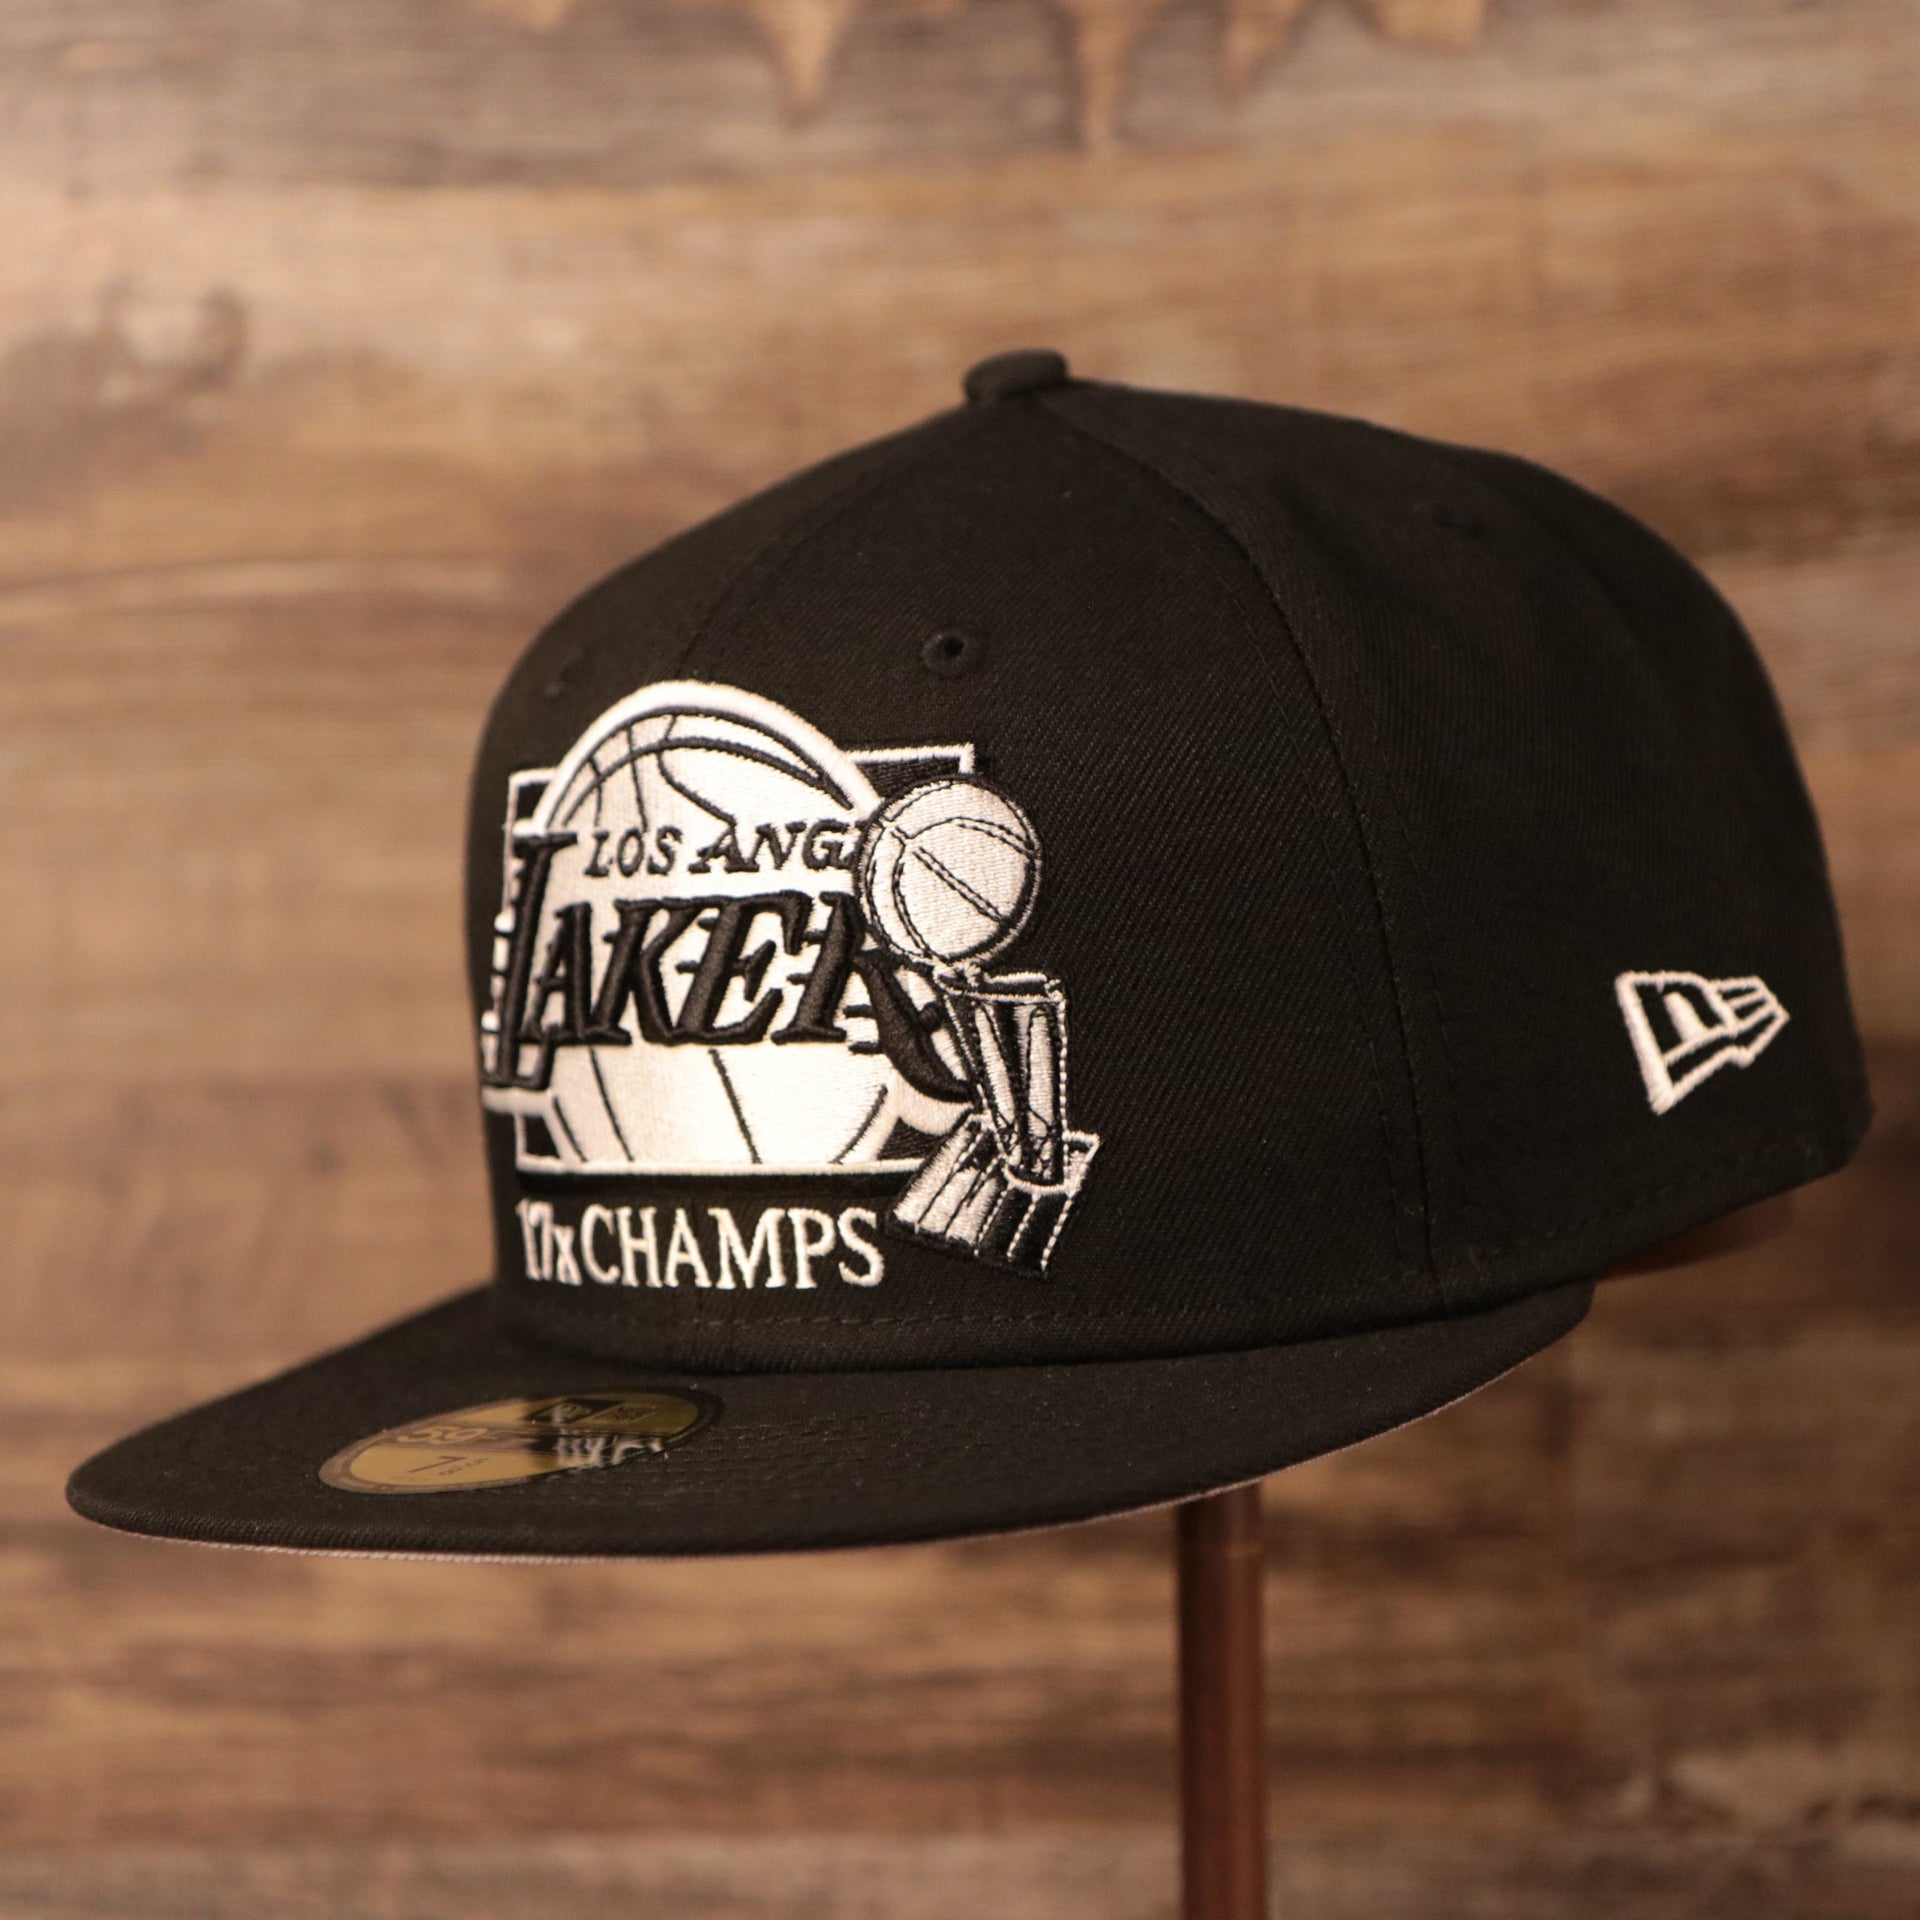 The Los Angeles Lakers 17x champs hat with grey bottom brim by New Era.